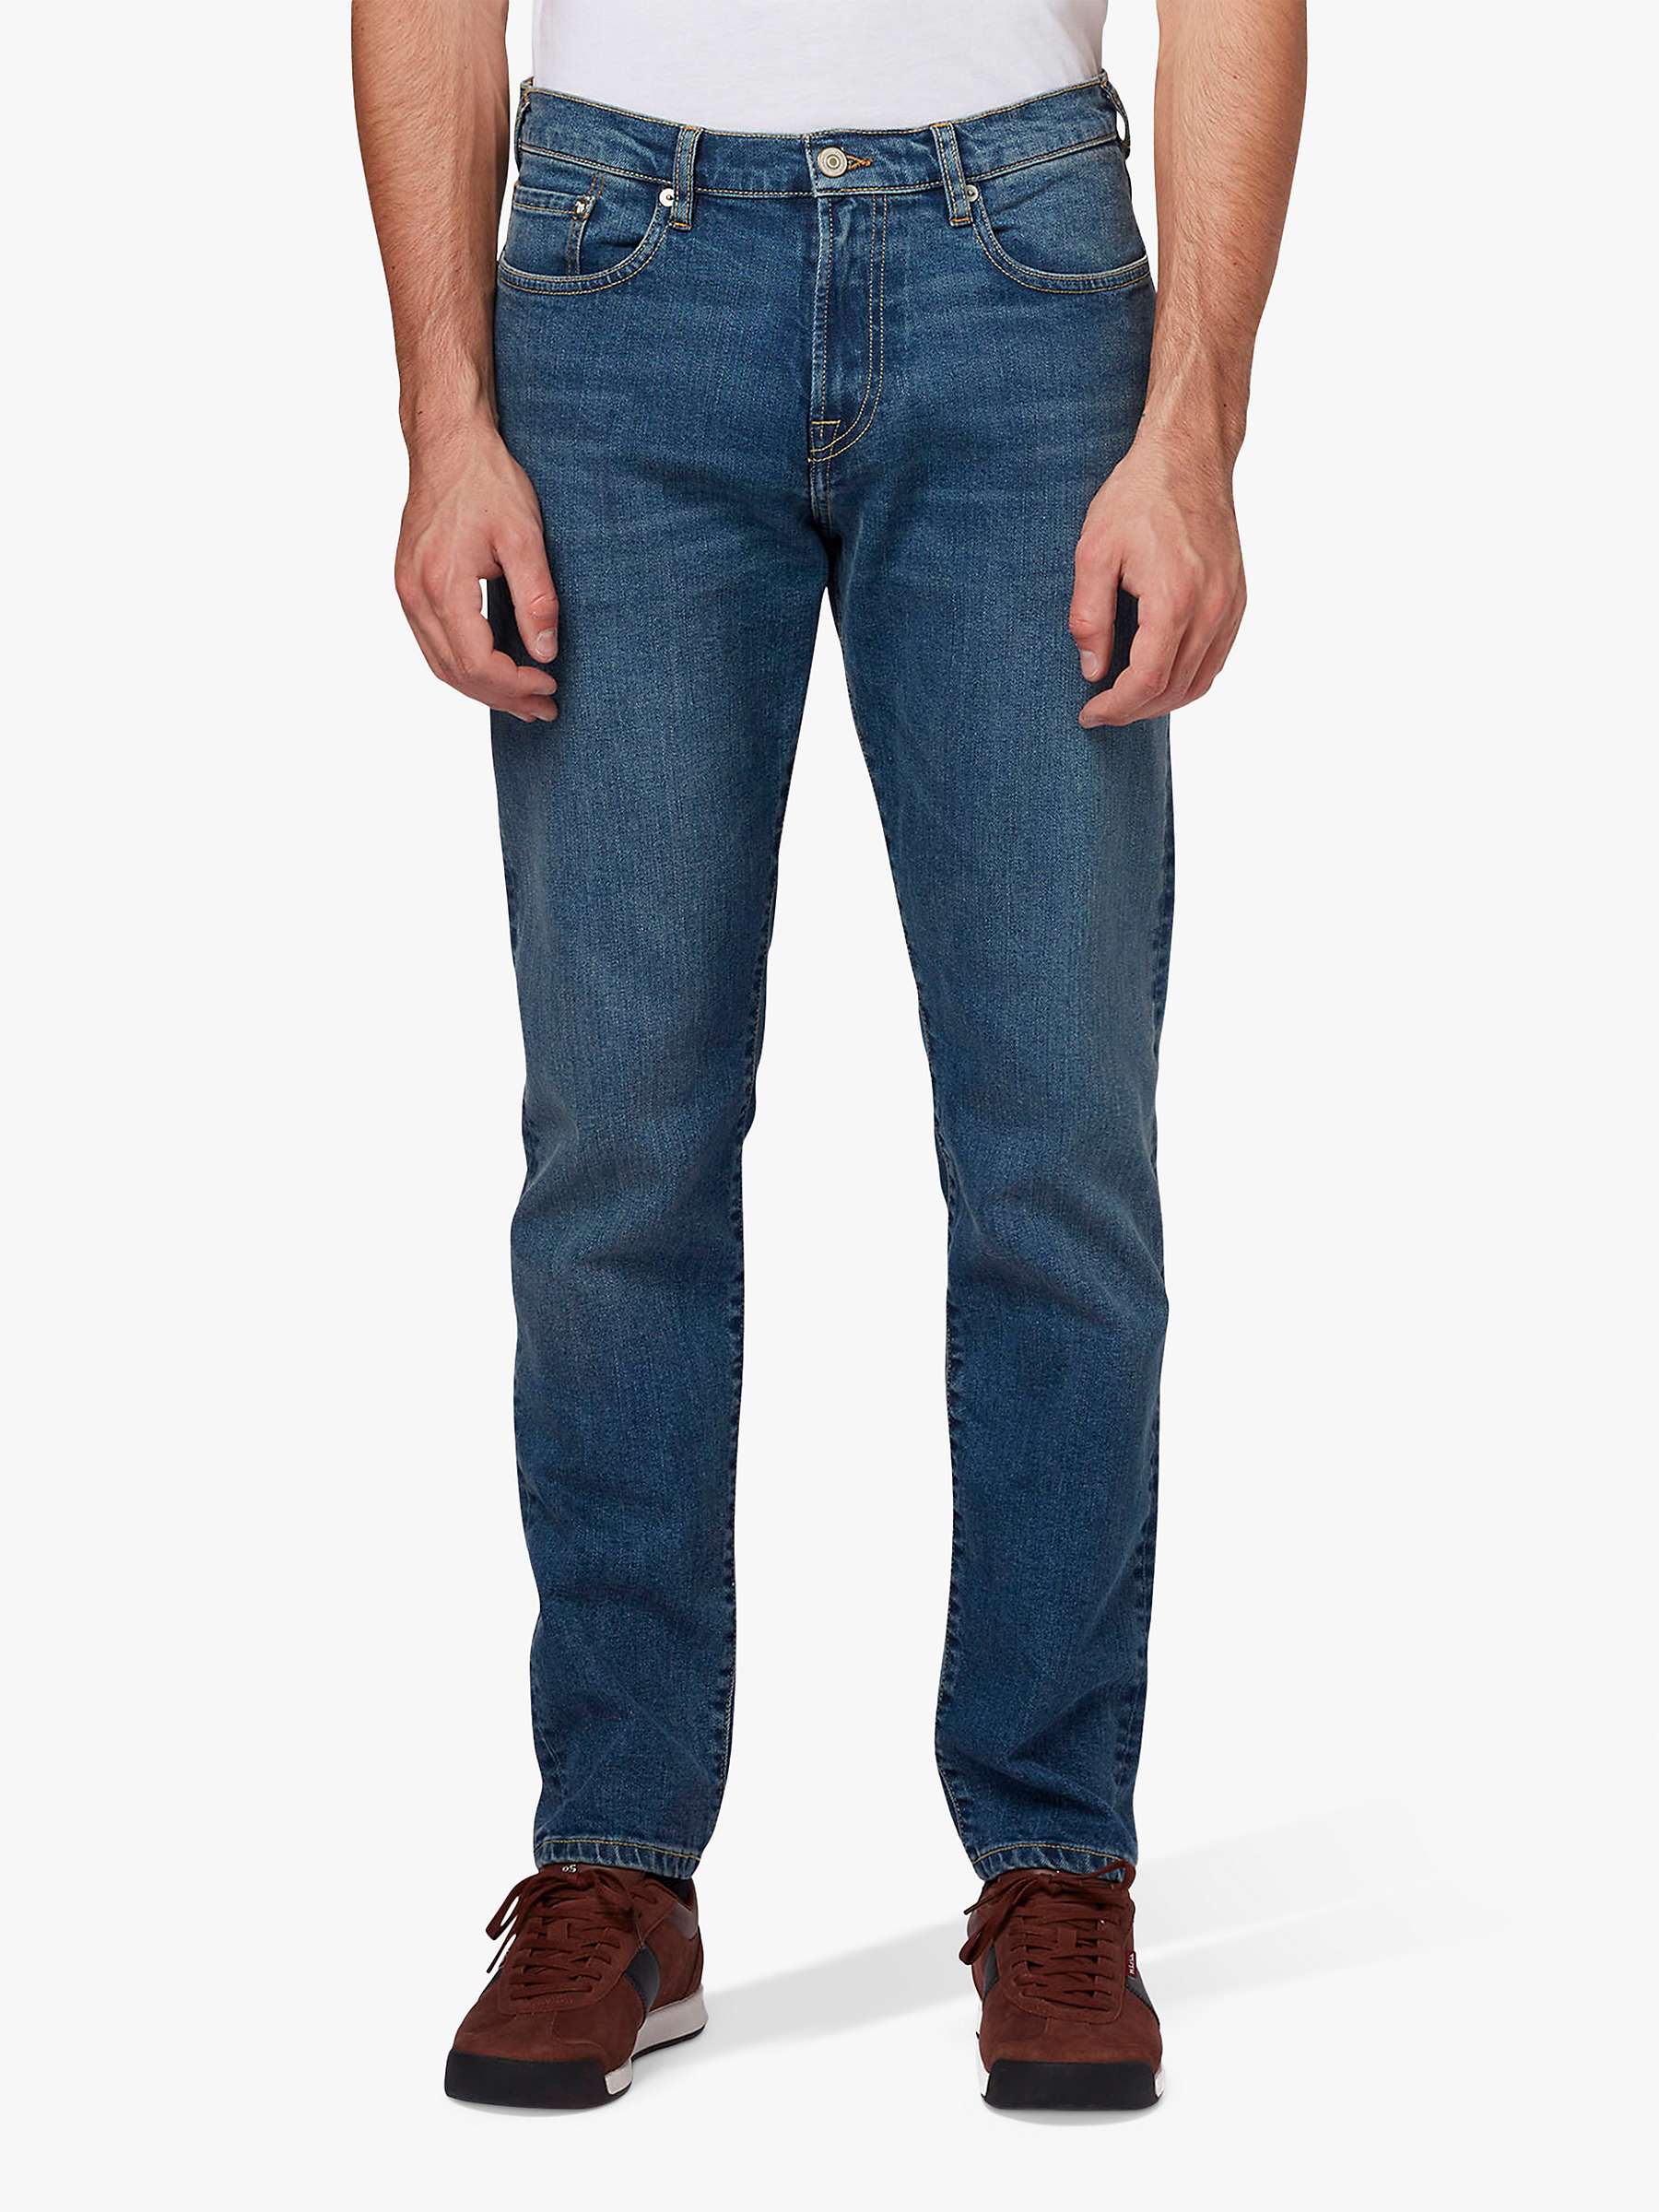 Paul Smith Tapered Jeans, Blue at John Lewis & Partners